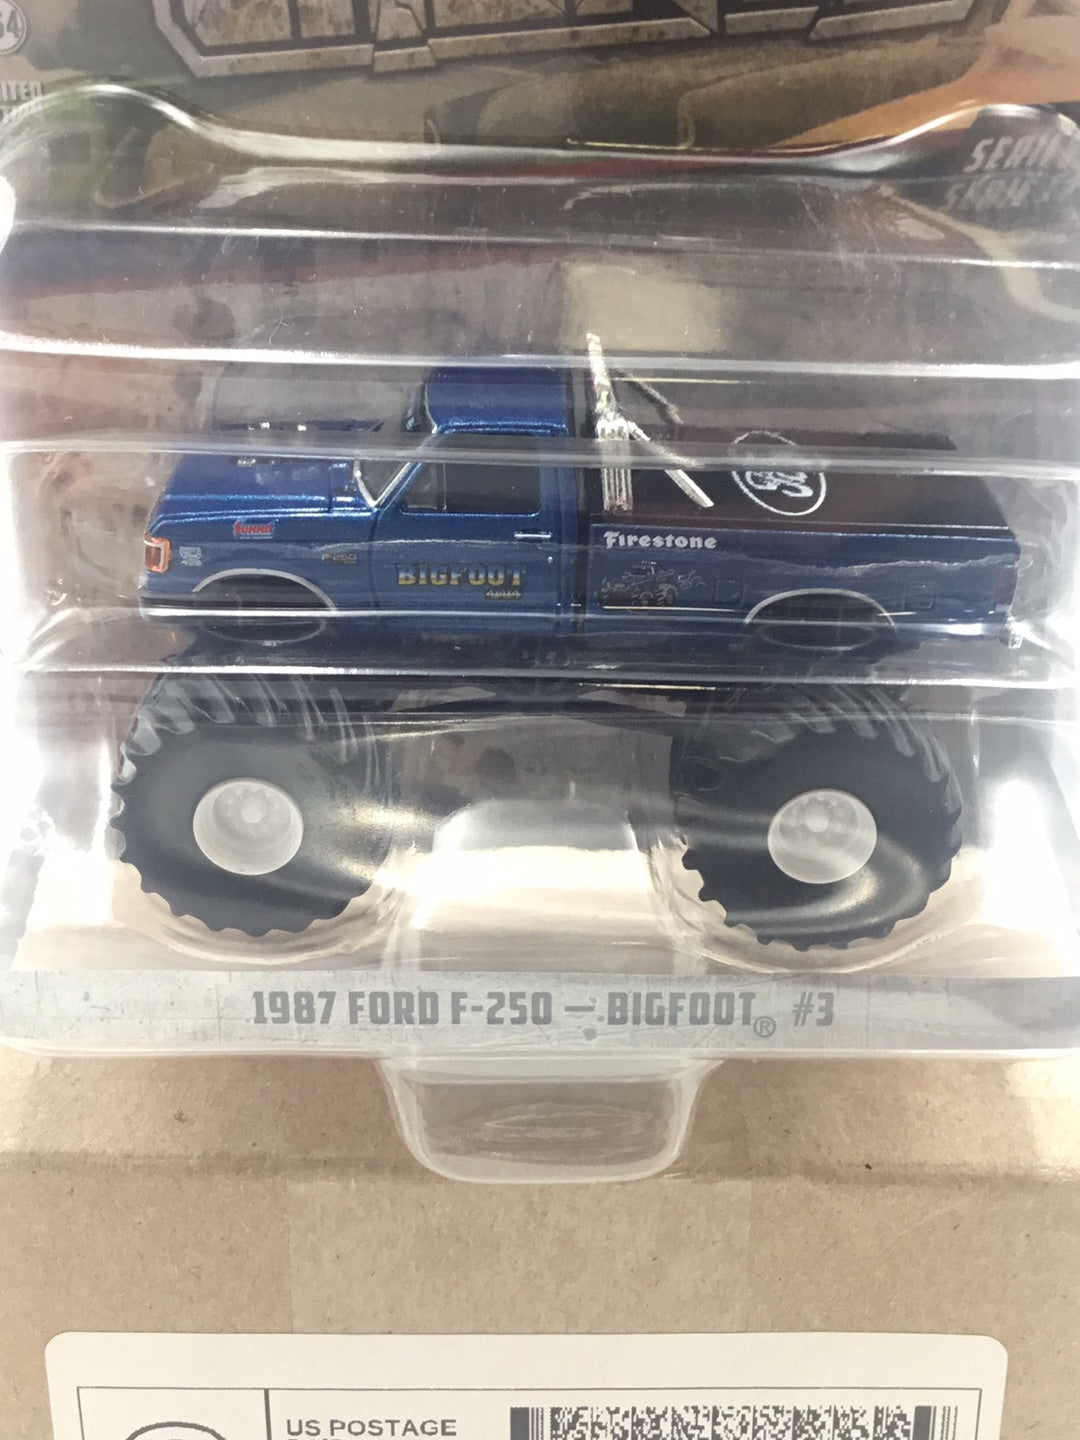 Greenlight Kings of crunch series 13 1993 Ford F-250 big foot #3